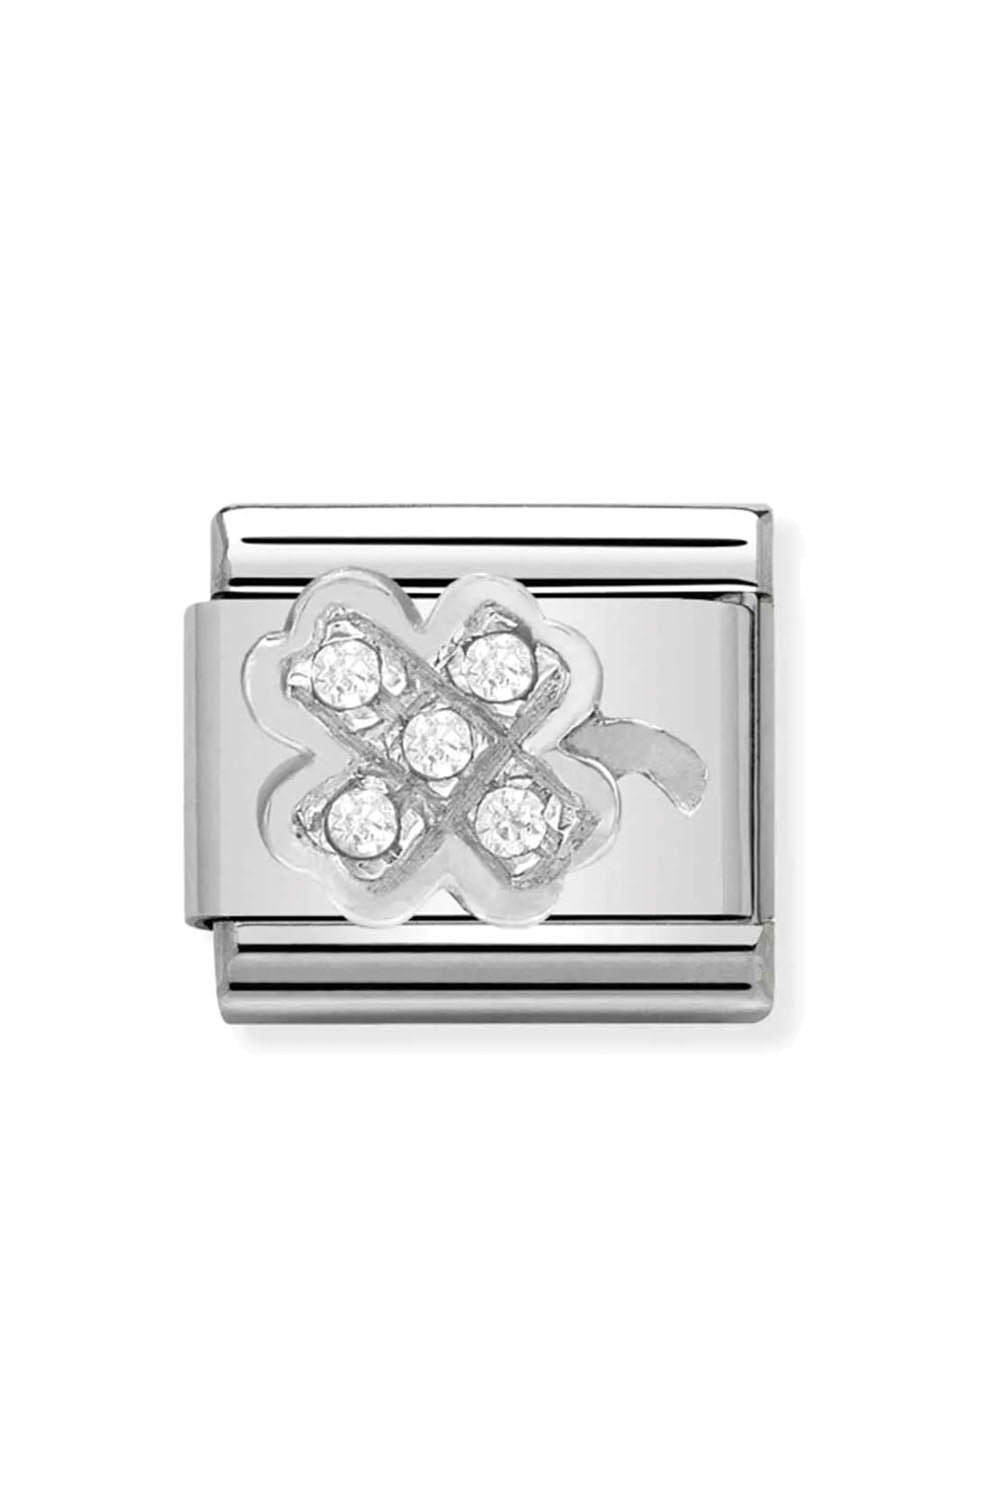 Symbols 925 Sterling Silver with CZ Clover